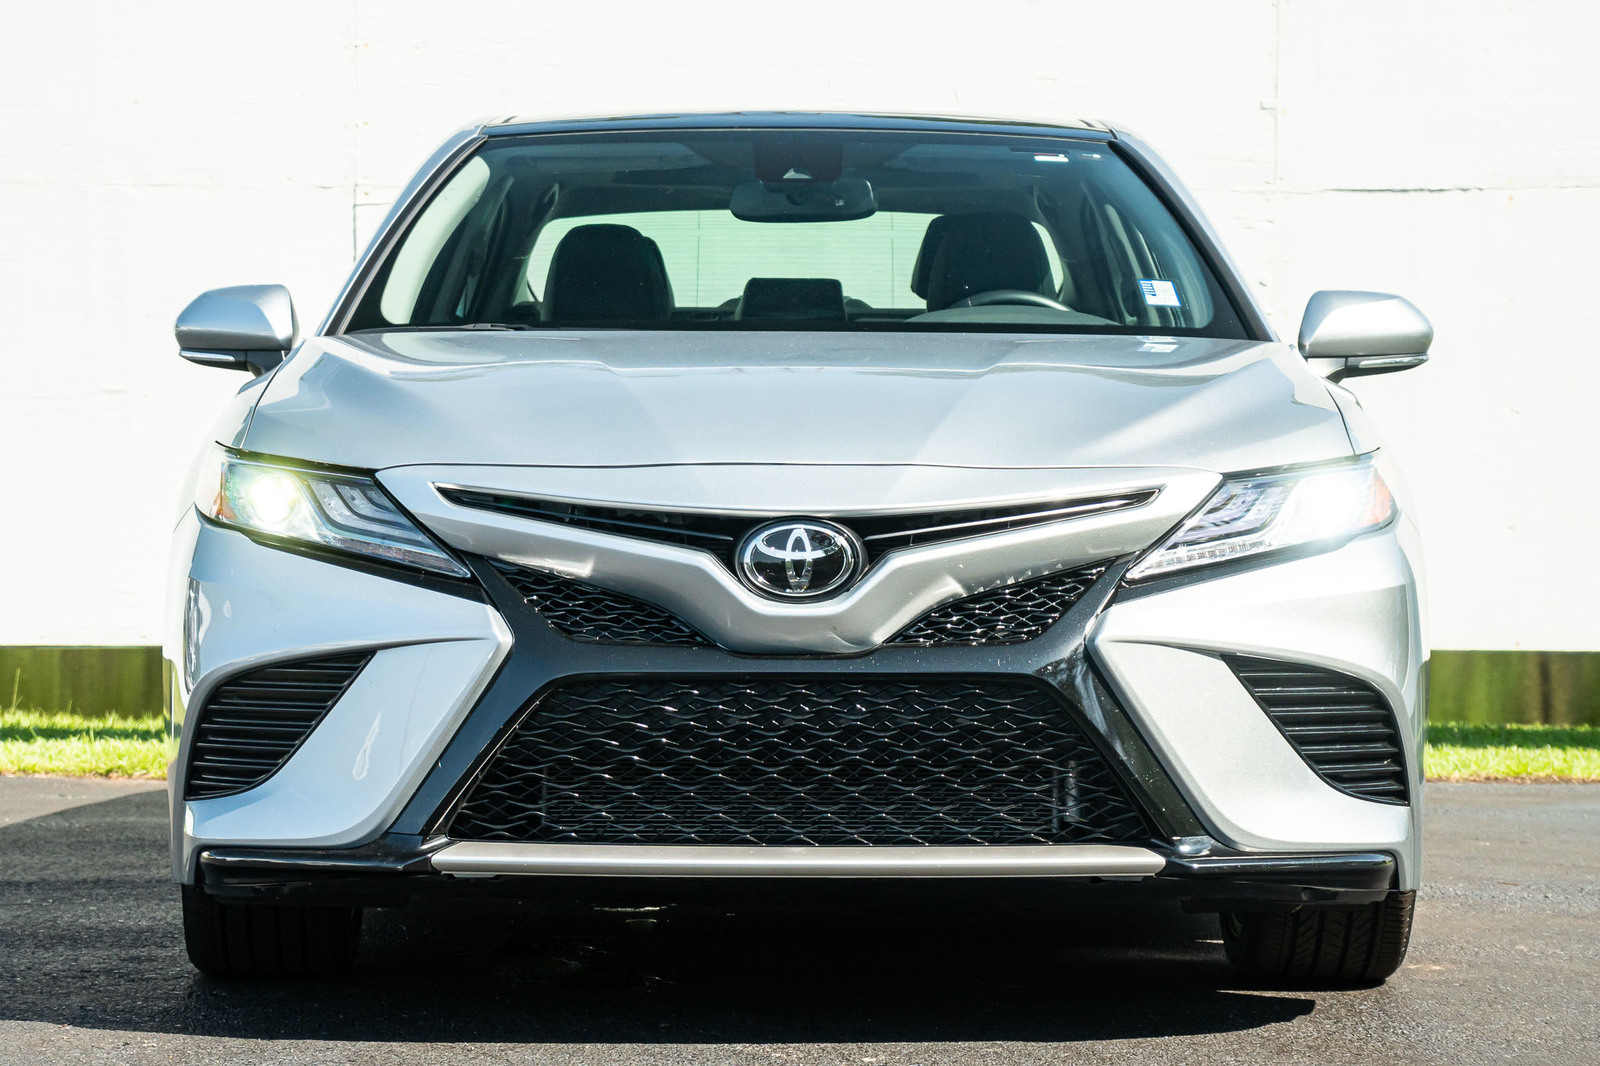 Pre-Owned 2019 Toyota Camry XSE Auto 4dr Car in Pawleys Island #C4195